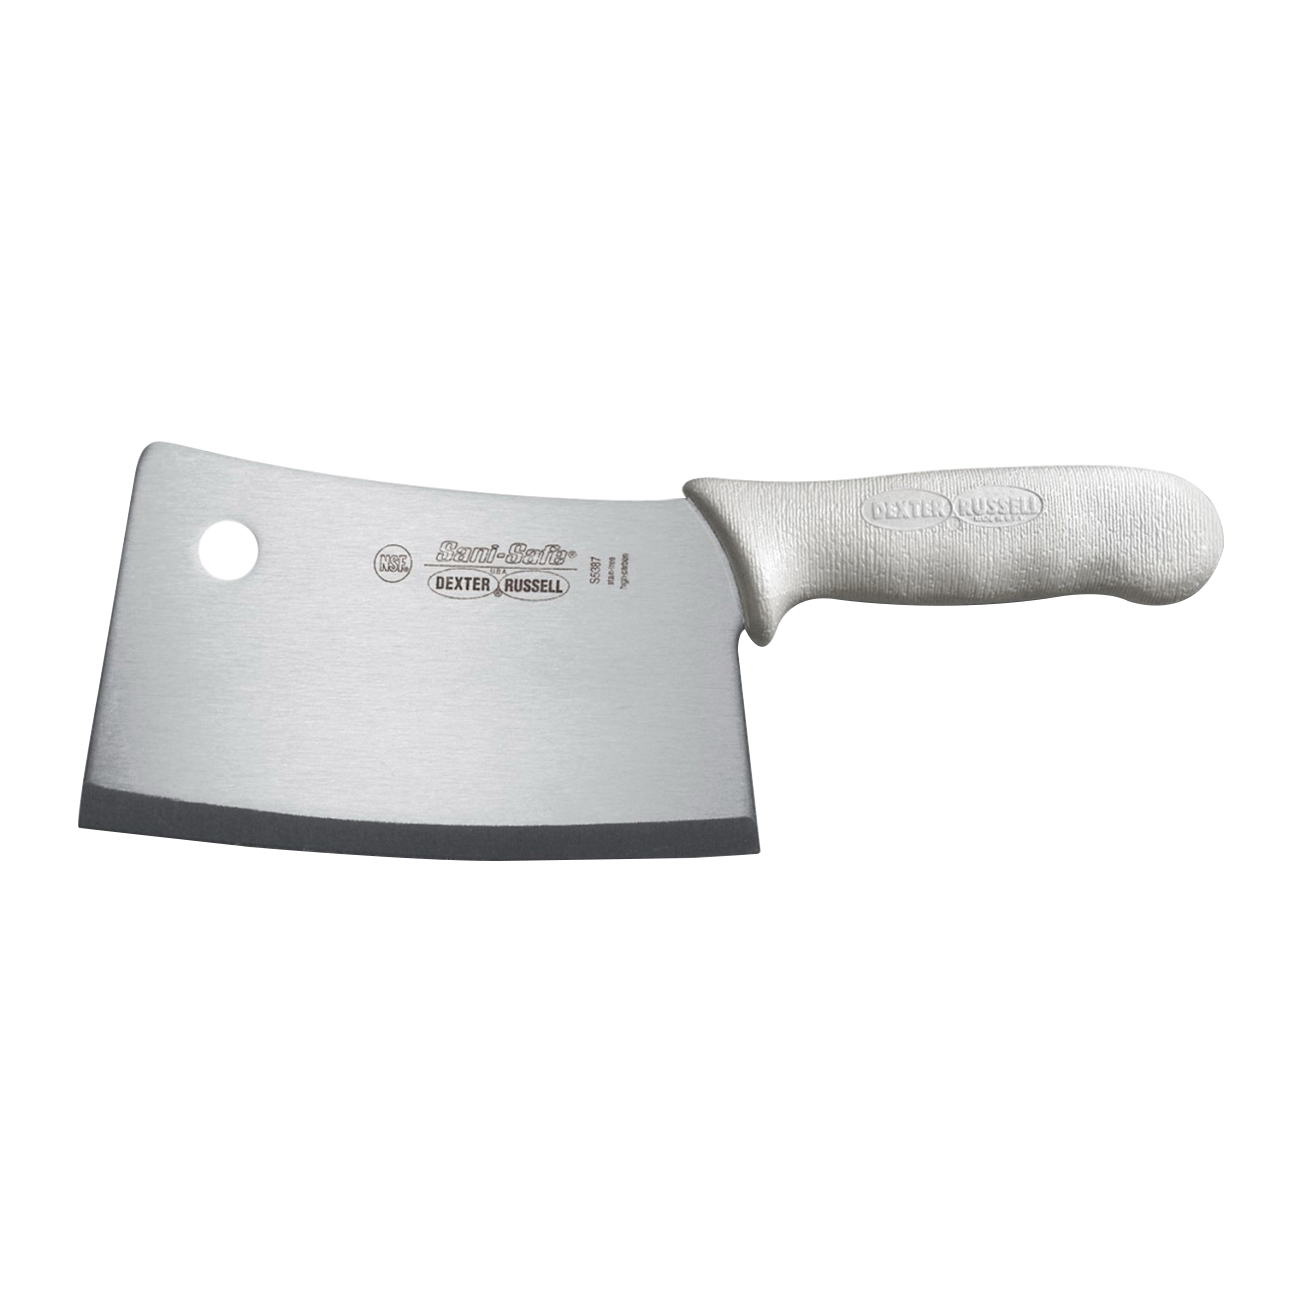 Dexter Rusell Sani-Safe Series S5387-CP Cleaver, 7 in L Blade, HCS Blade, Polypropylene Handle, White Handle